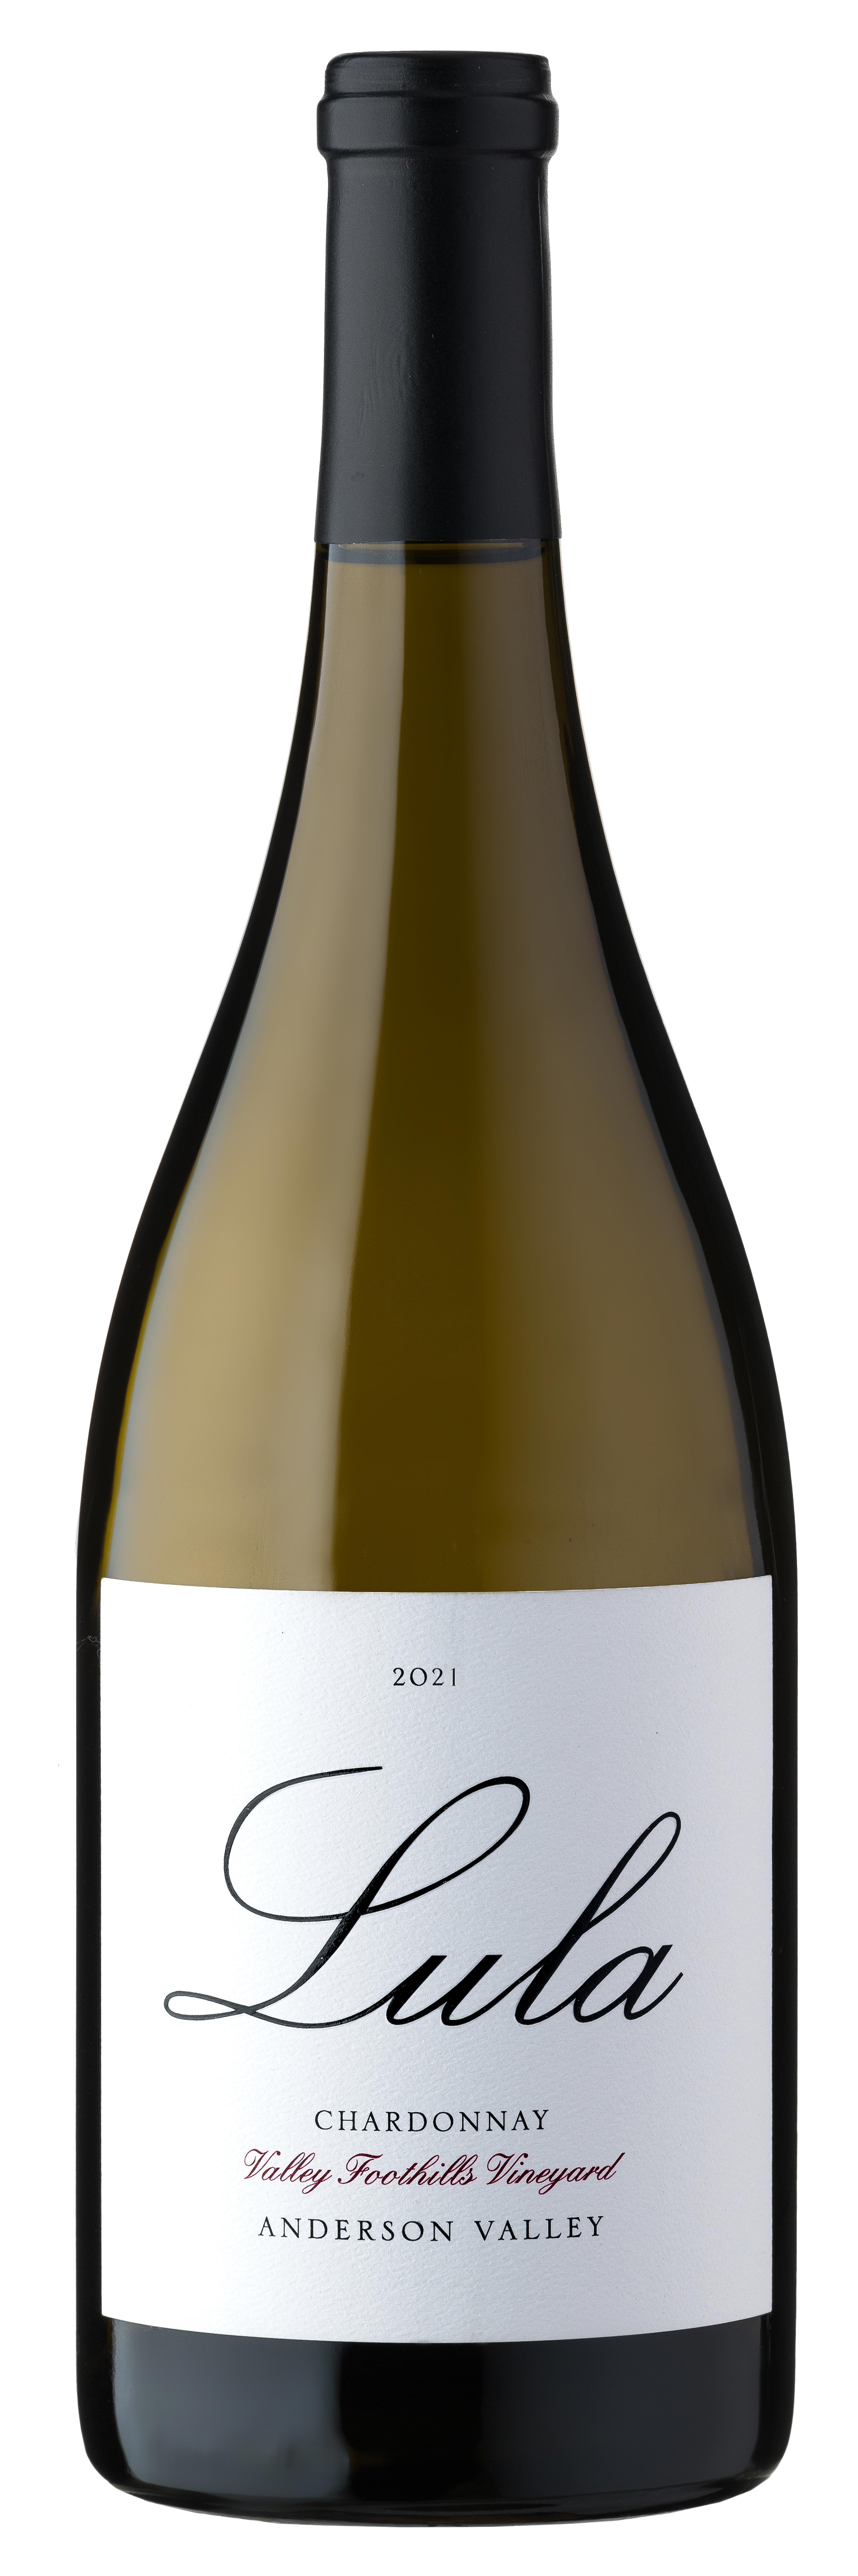 Product Image for 2021 Anderson Valley Chardonnay